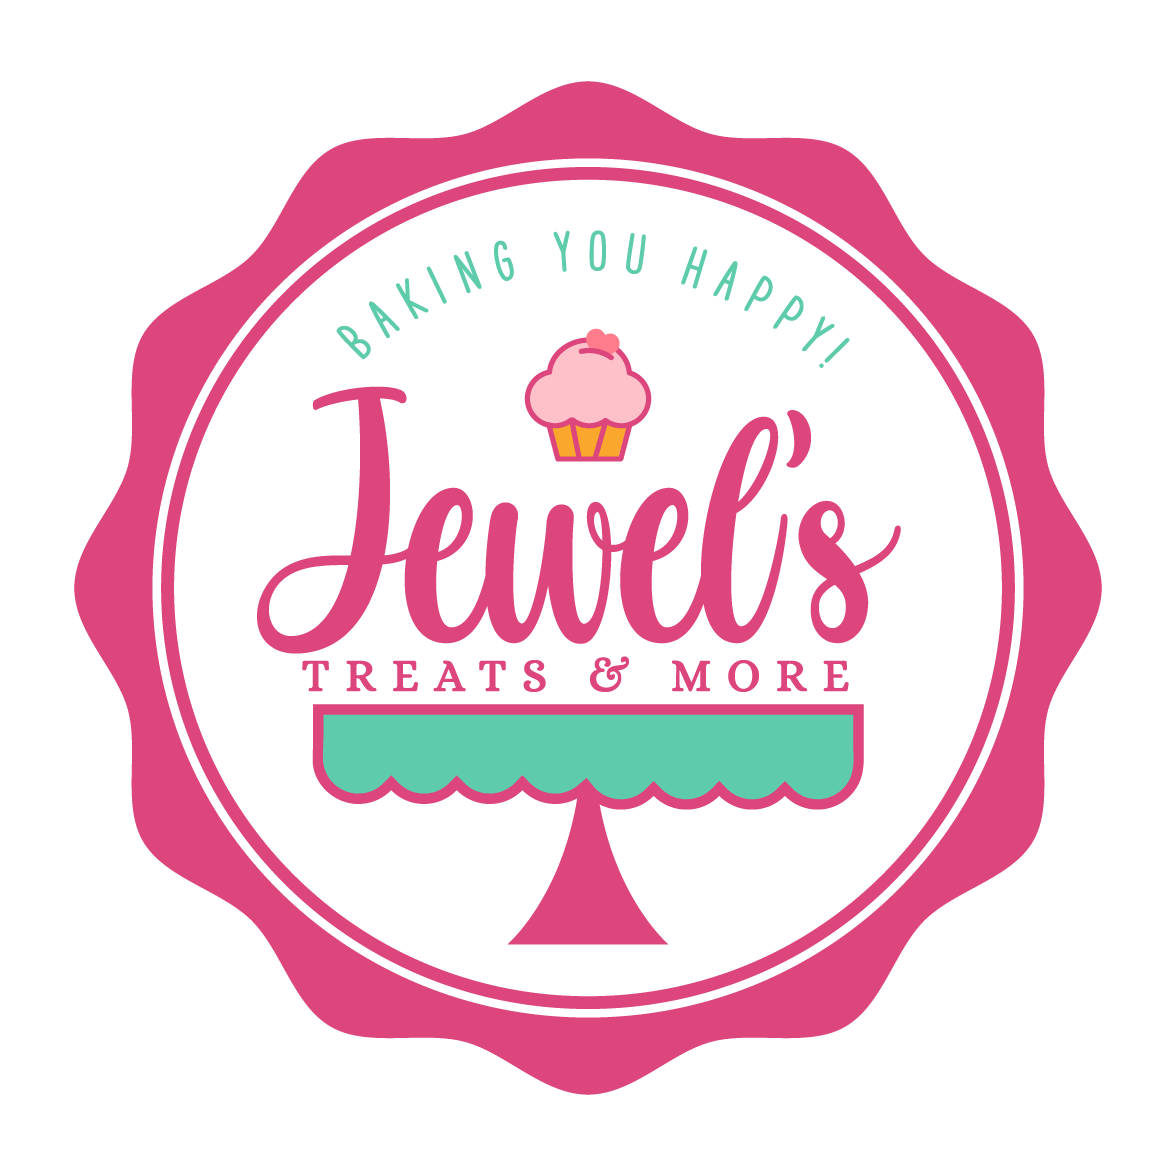 Jewels Treats and More Logo